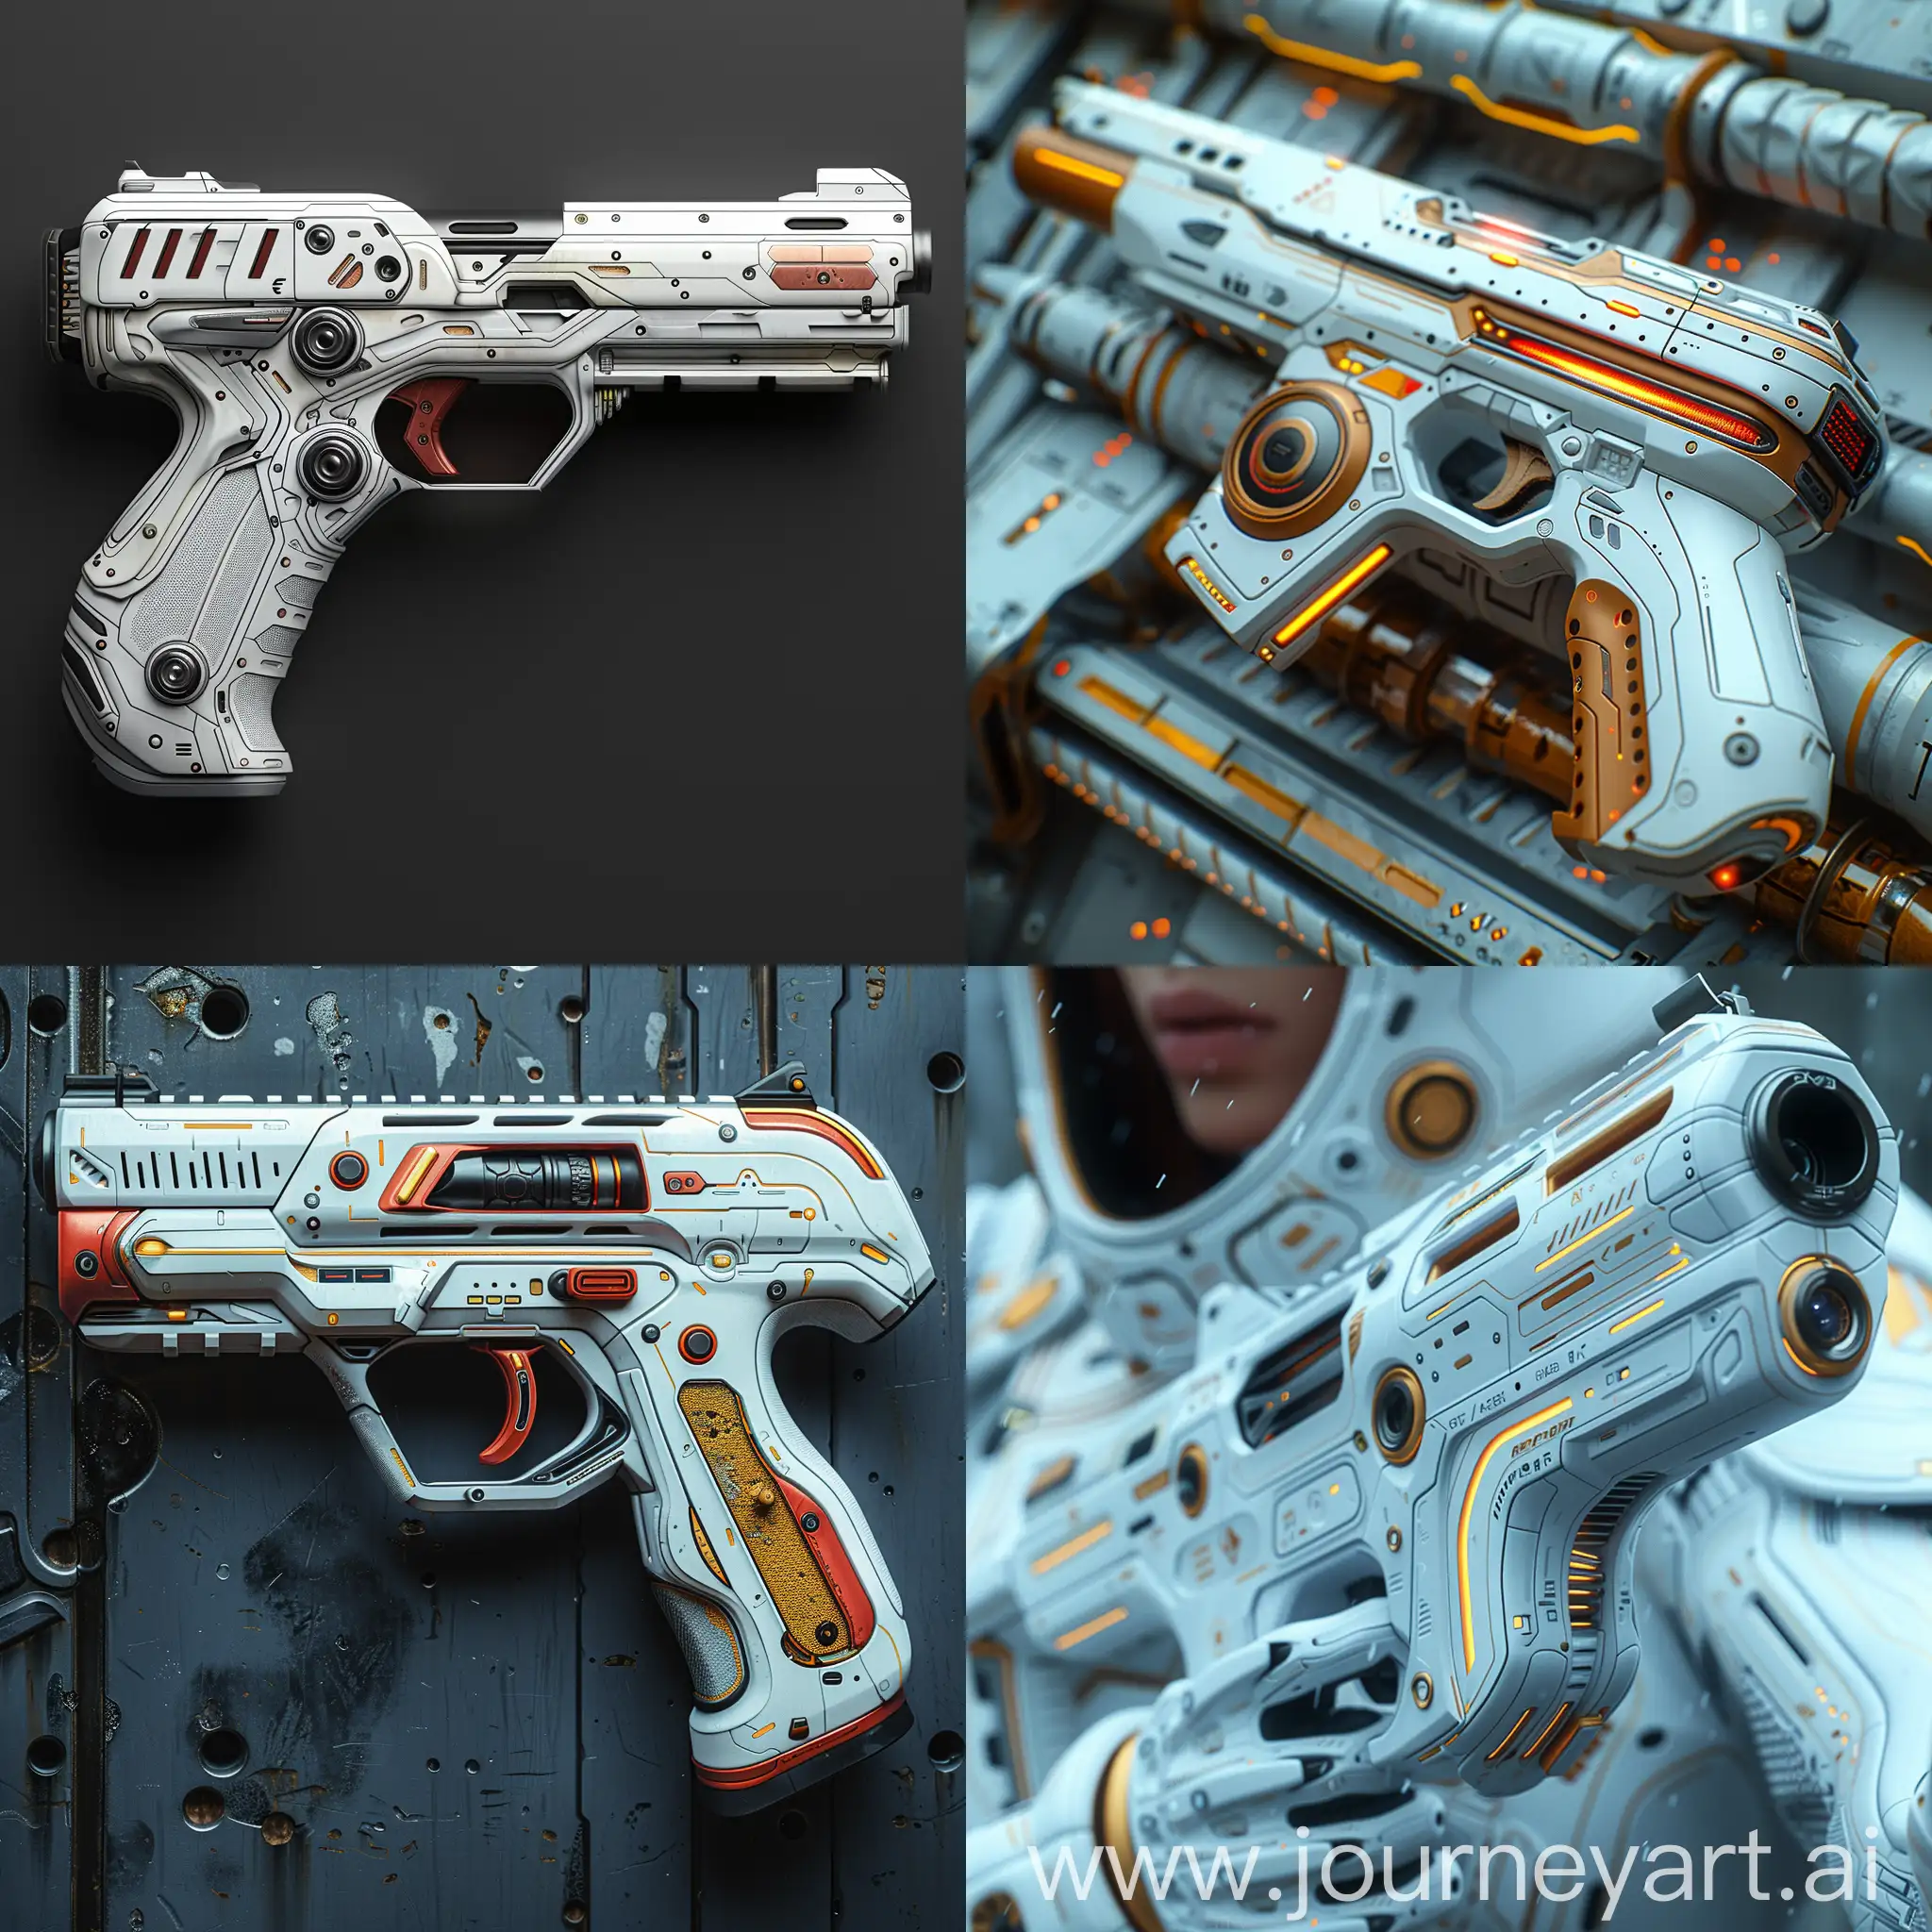 Futuristic pistol, 2077, Plasma Pistol, Smart Weapon, Compact and Lethal, Modular Design, Safety Features, octane render --stylize 1000